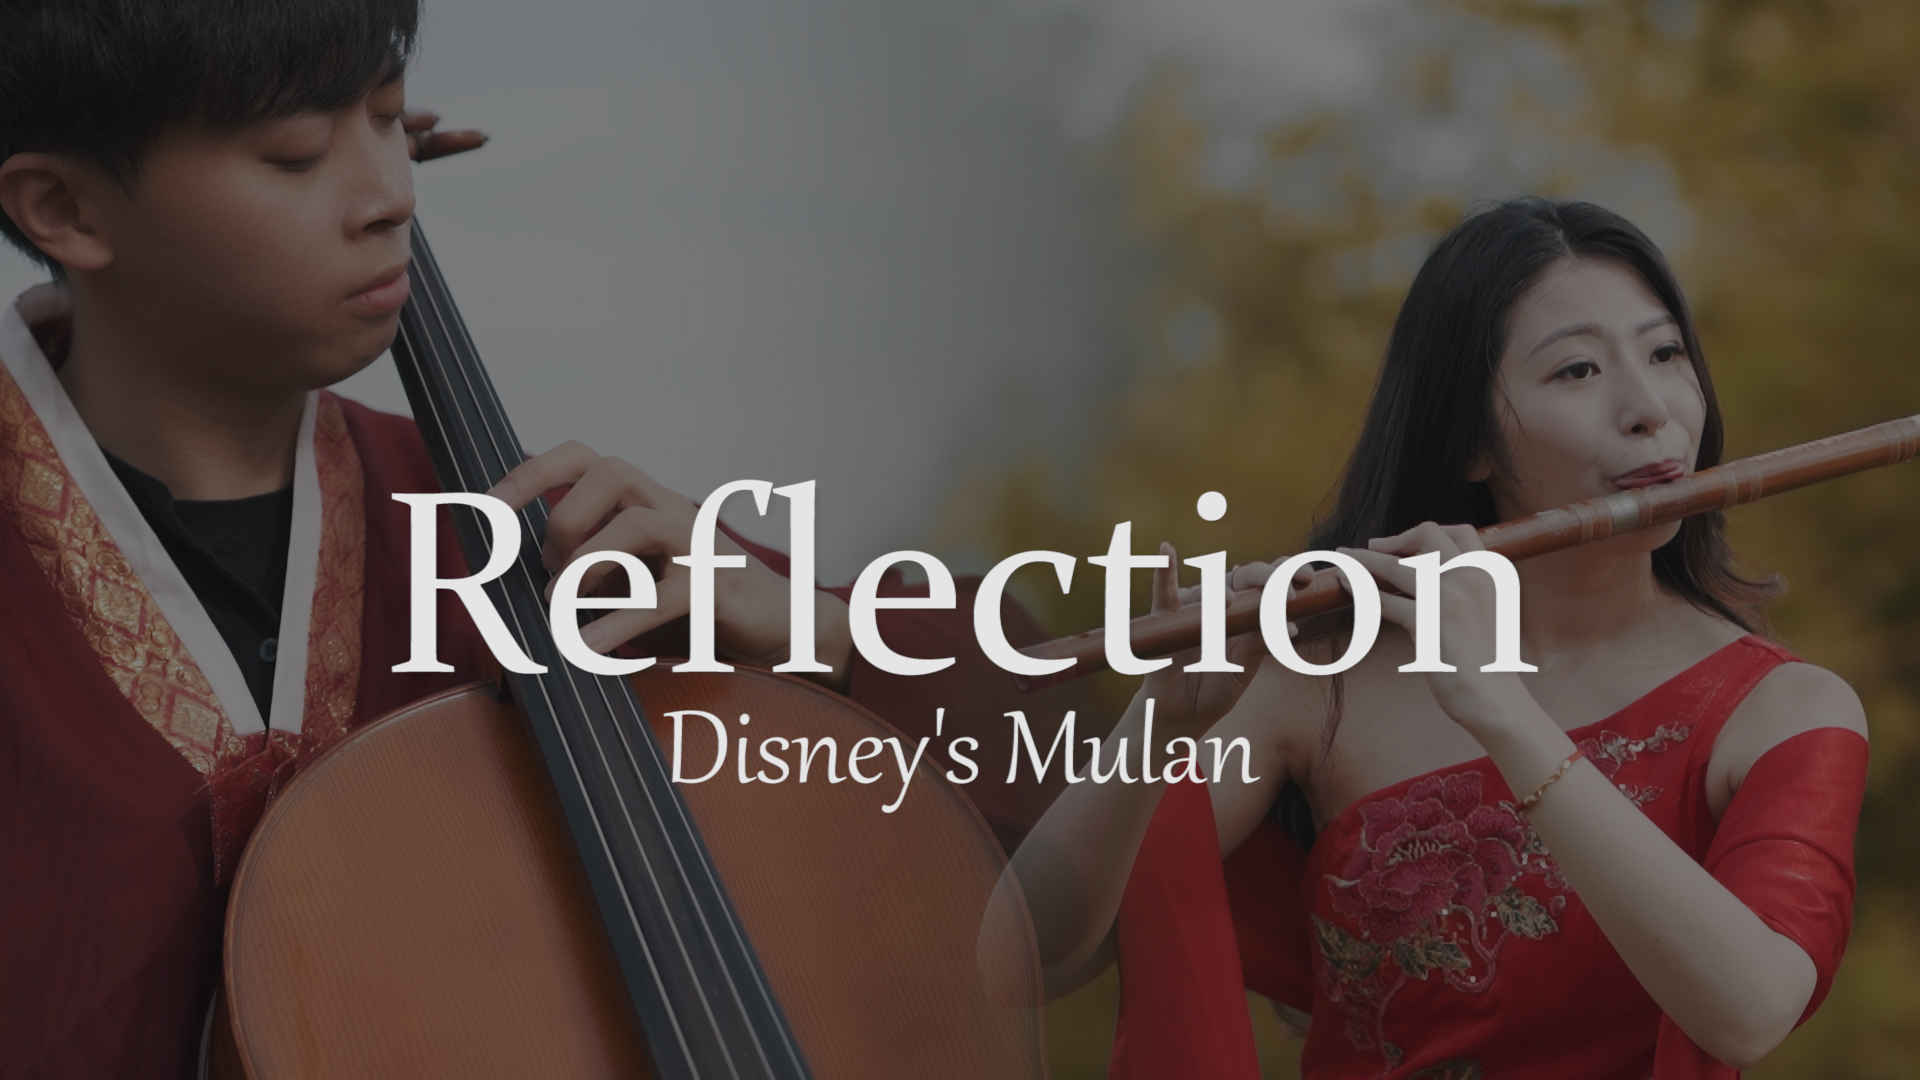  Reflection from (Mulan) 《花木蘭》電影主題曲 -大提琴竹笛二重奏 『cover by YoYo Cello』